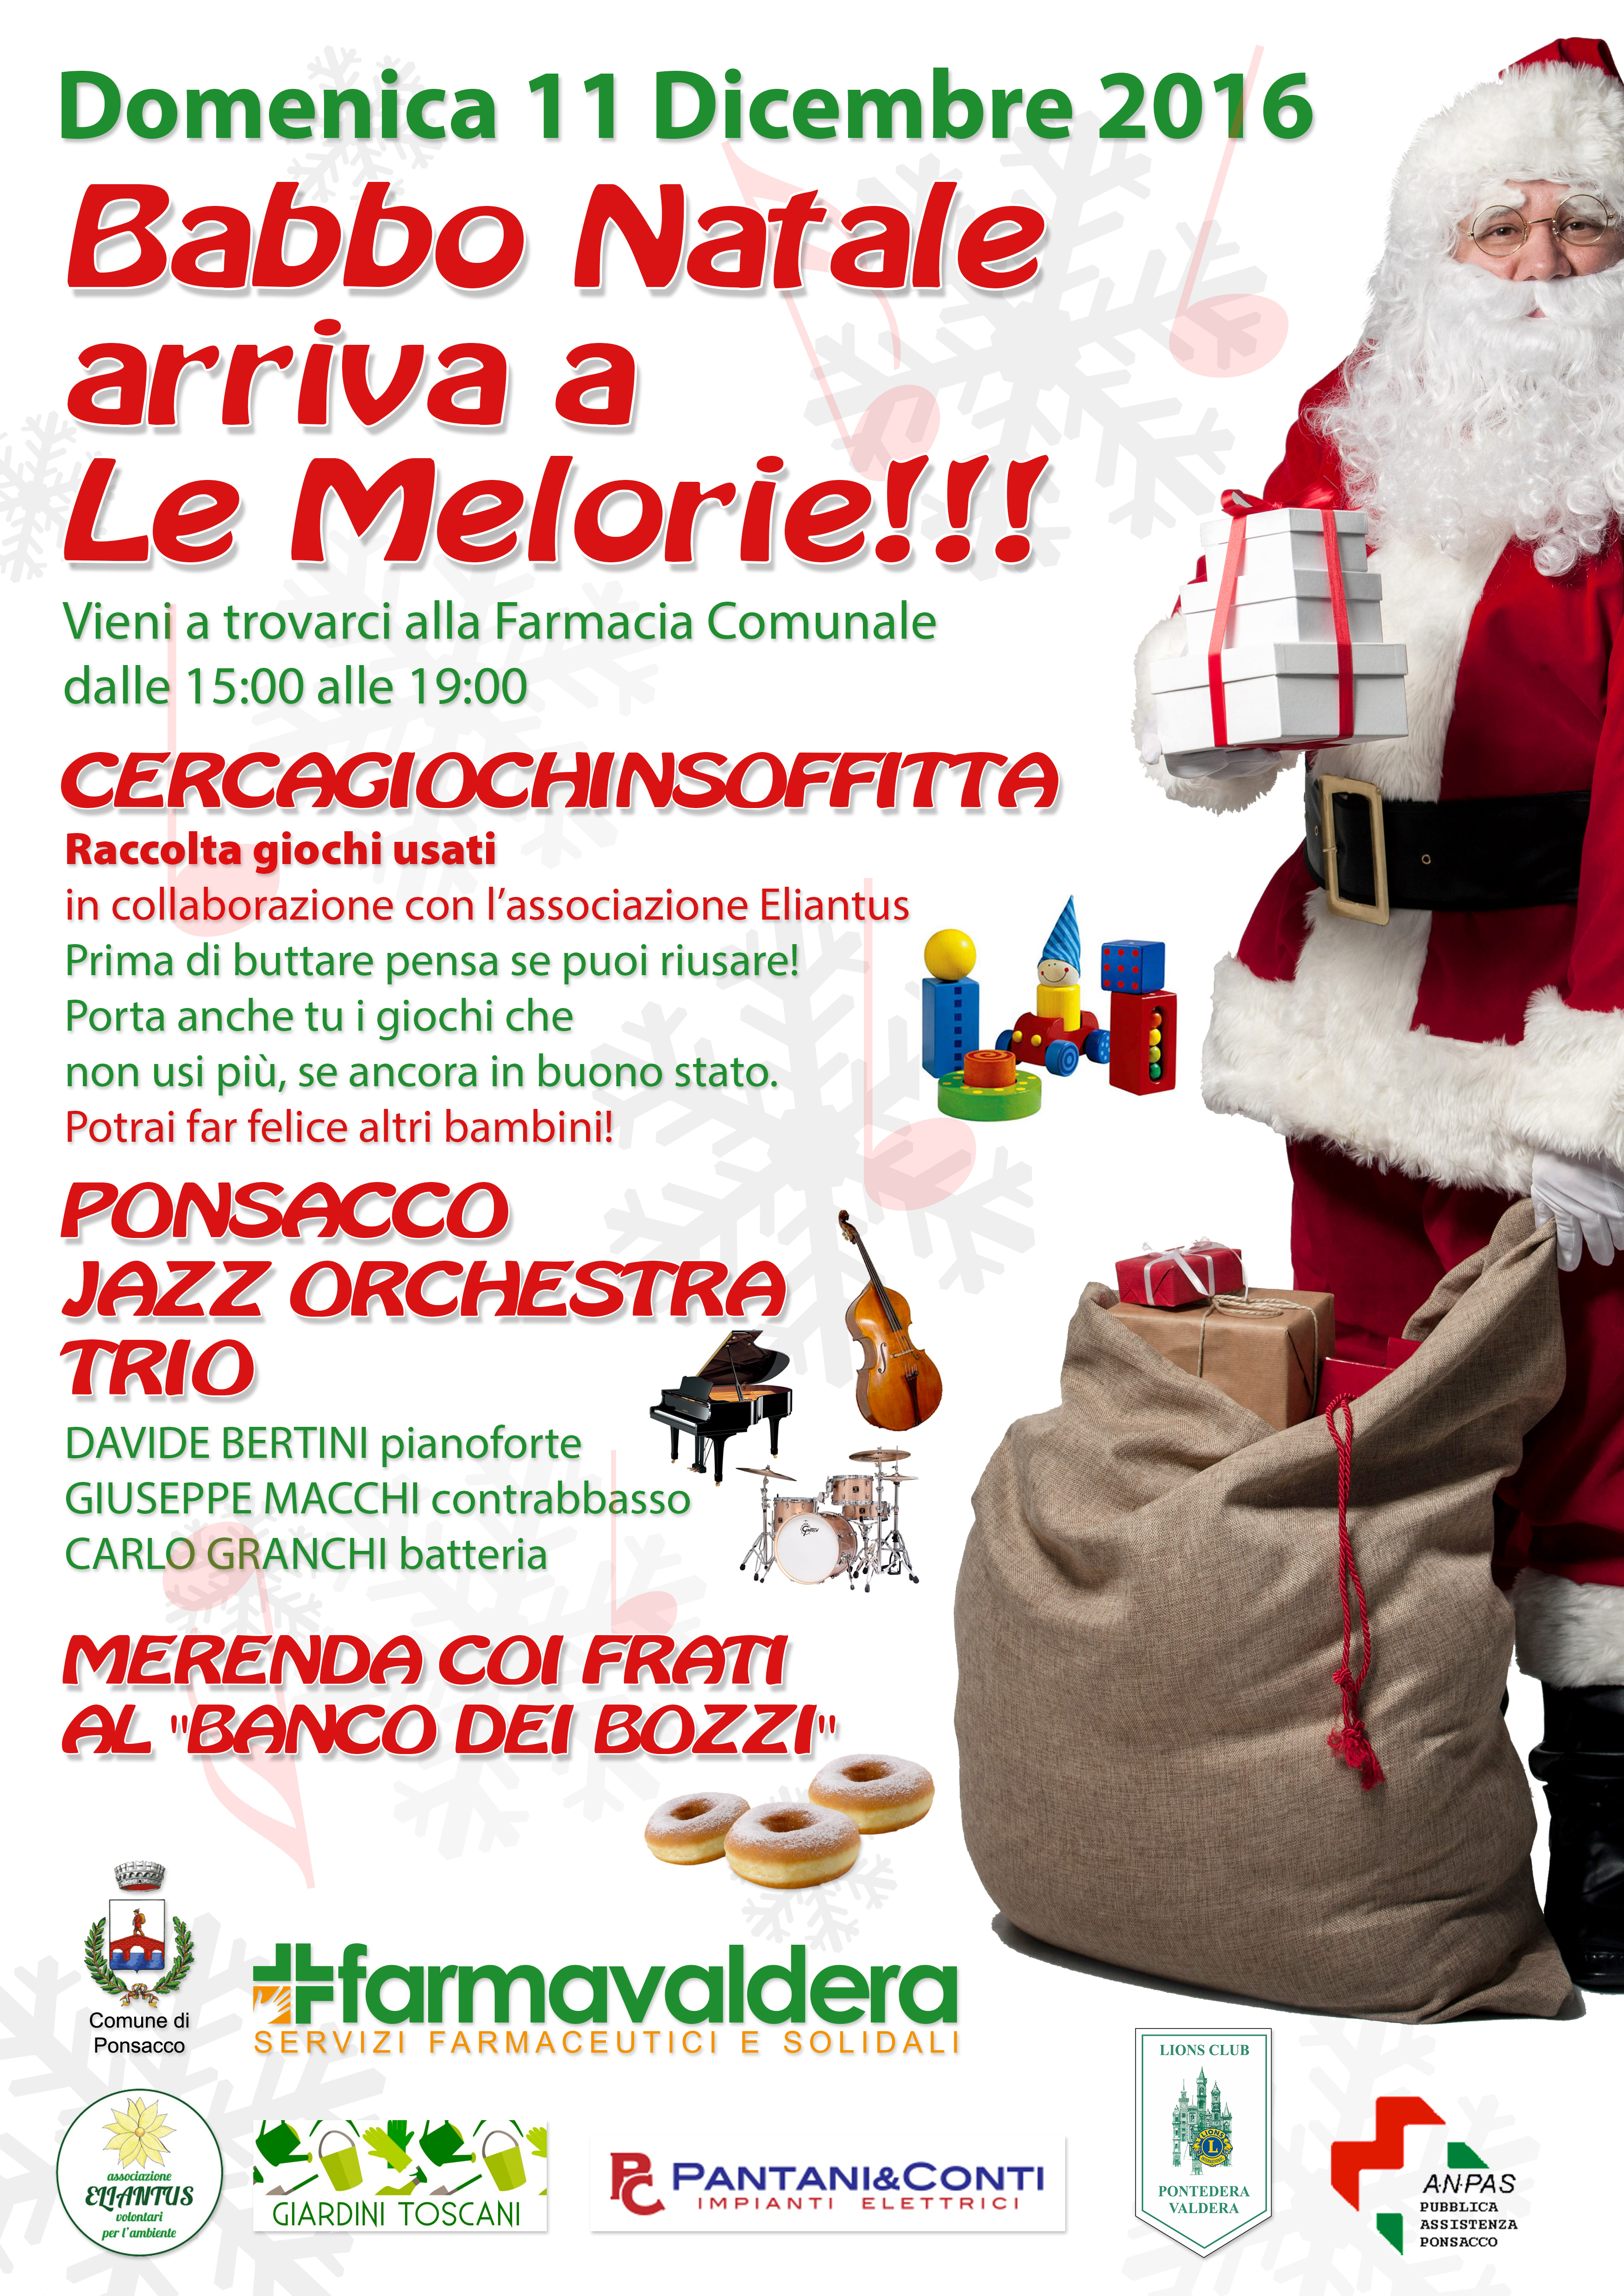 Babbo Natale arriva a Le Melorie